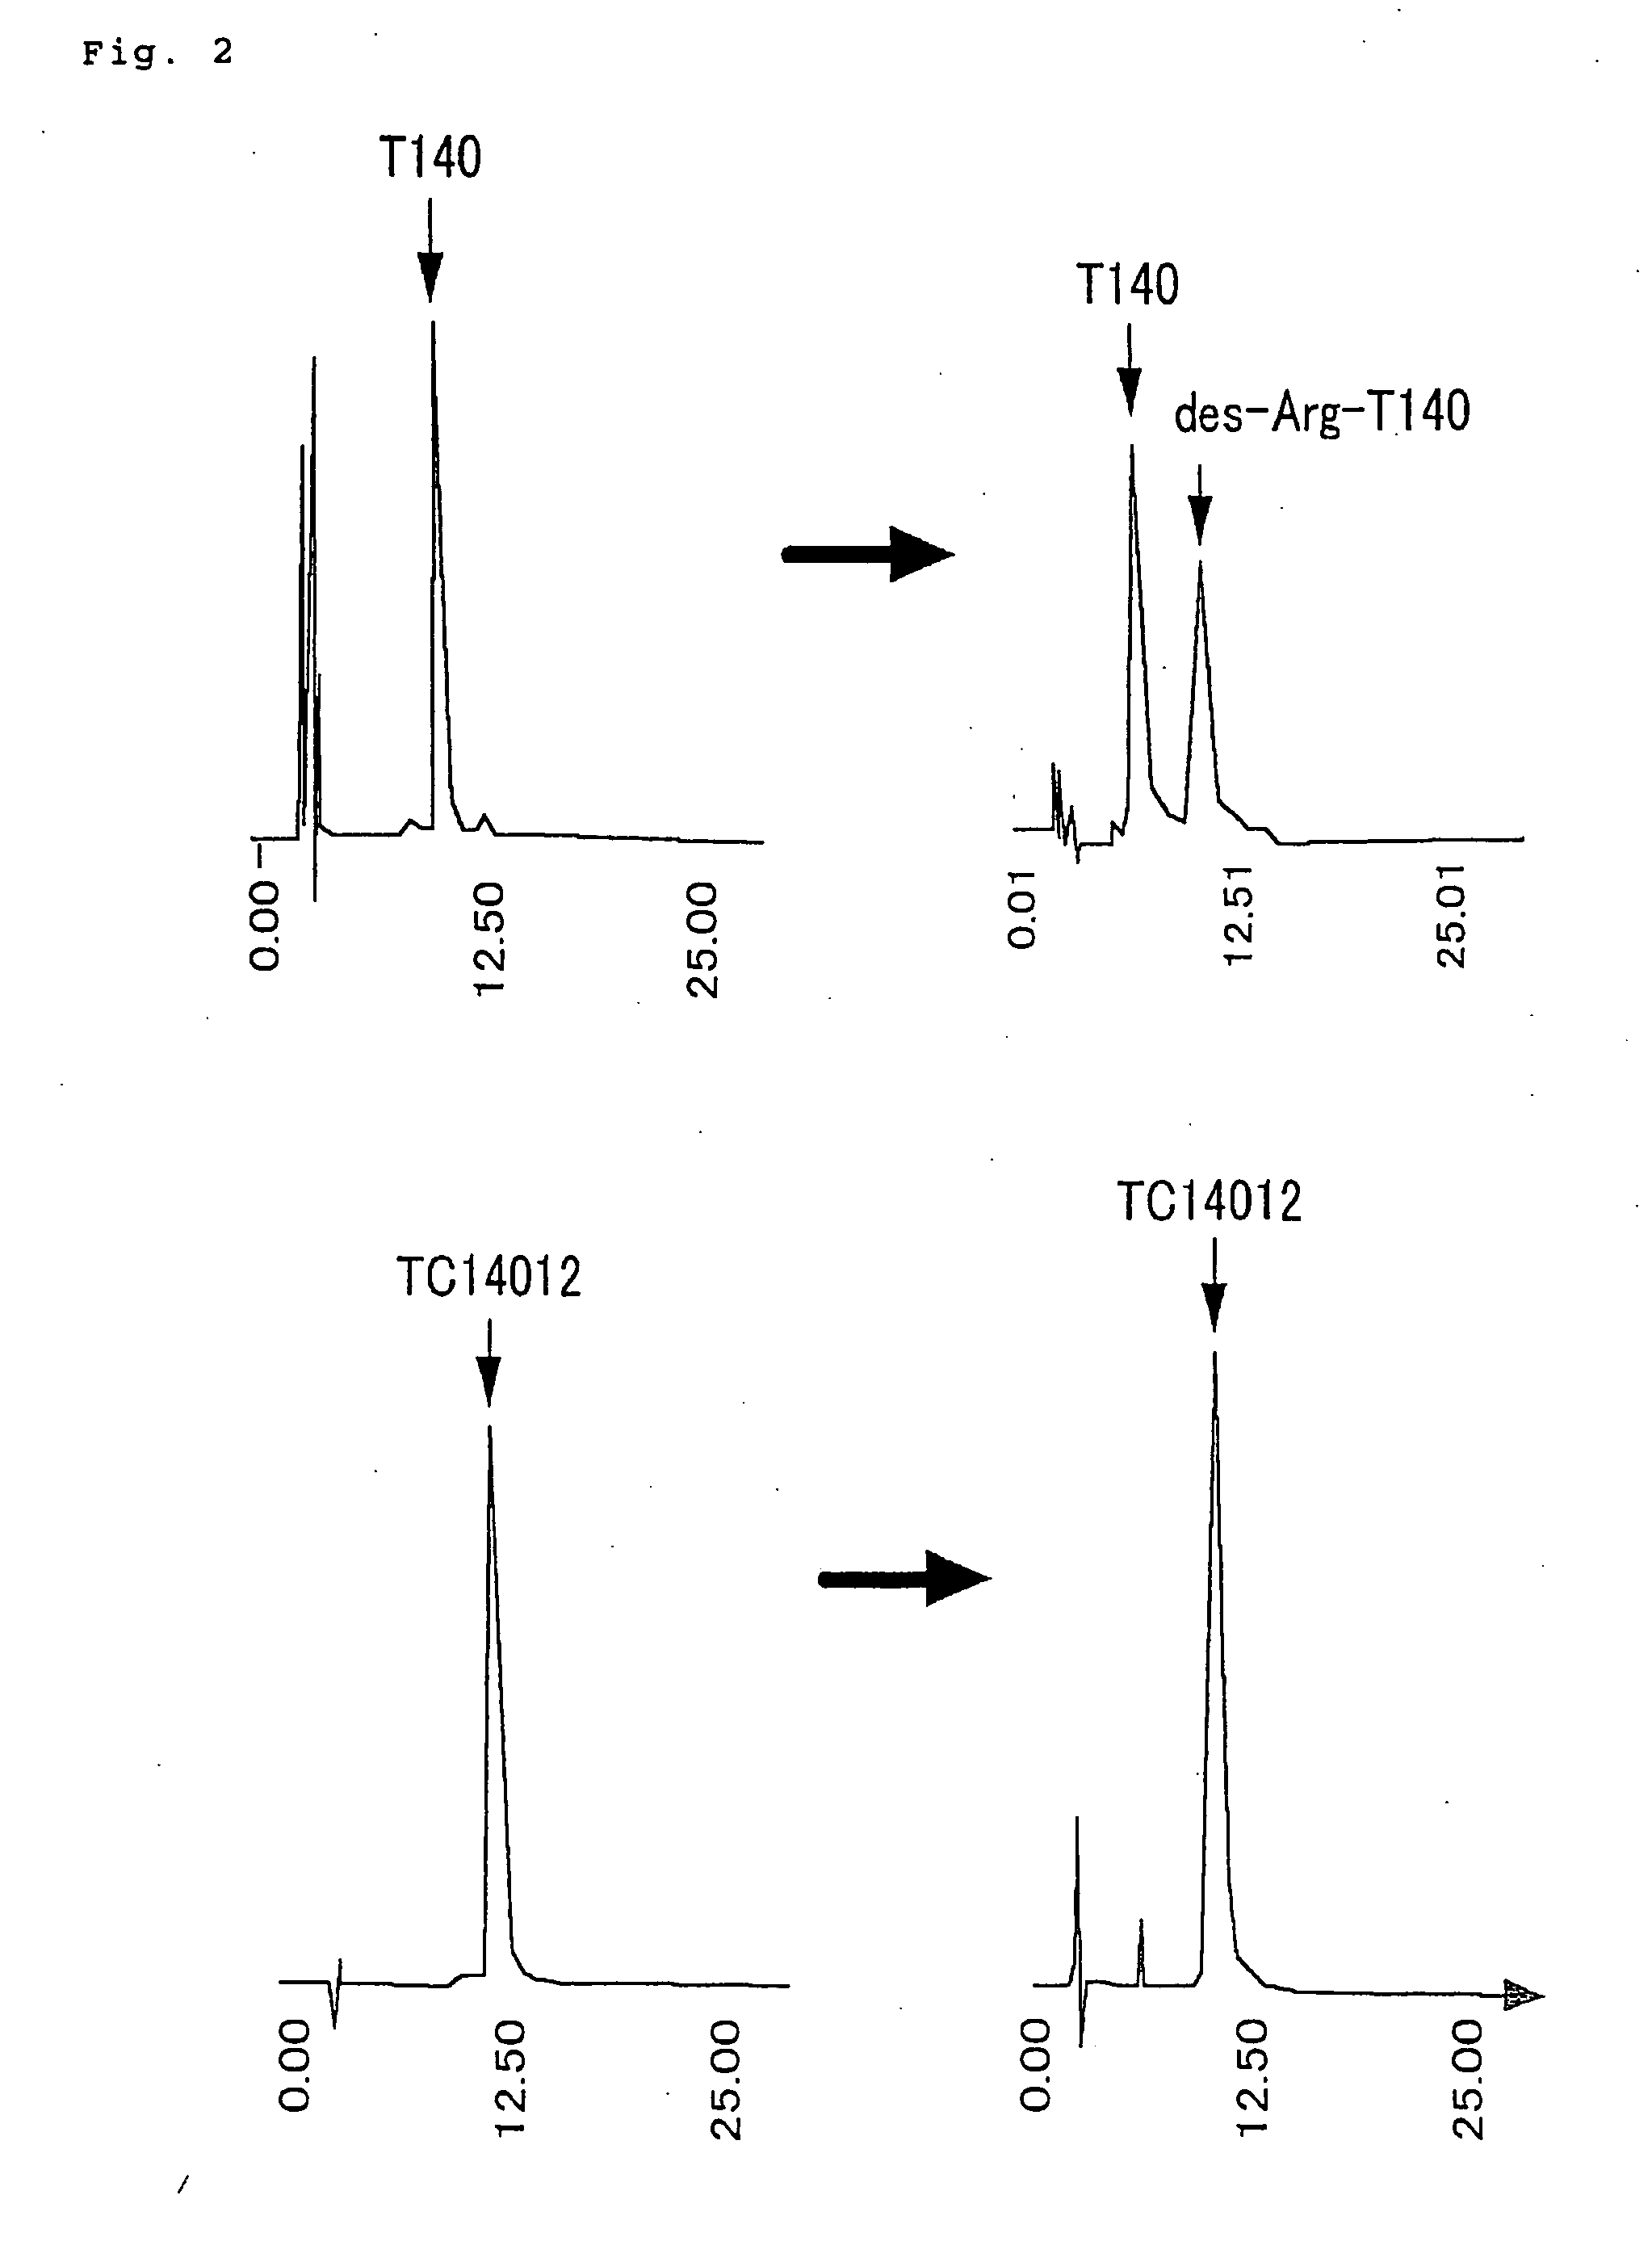 Novel polypeptide anti-HIV agent containing the same